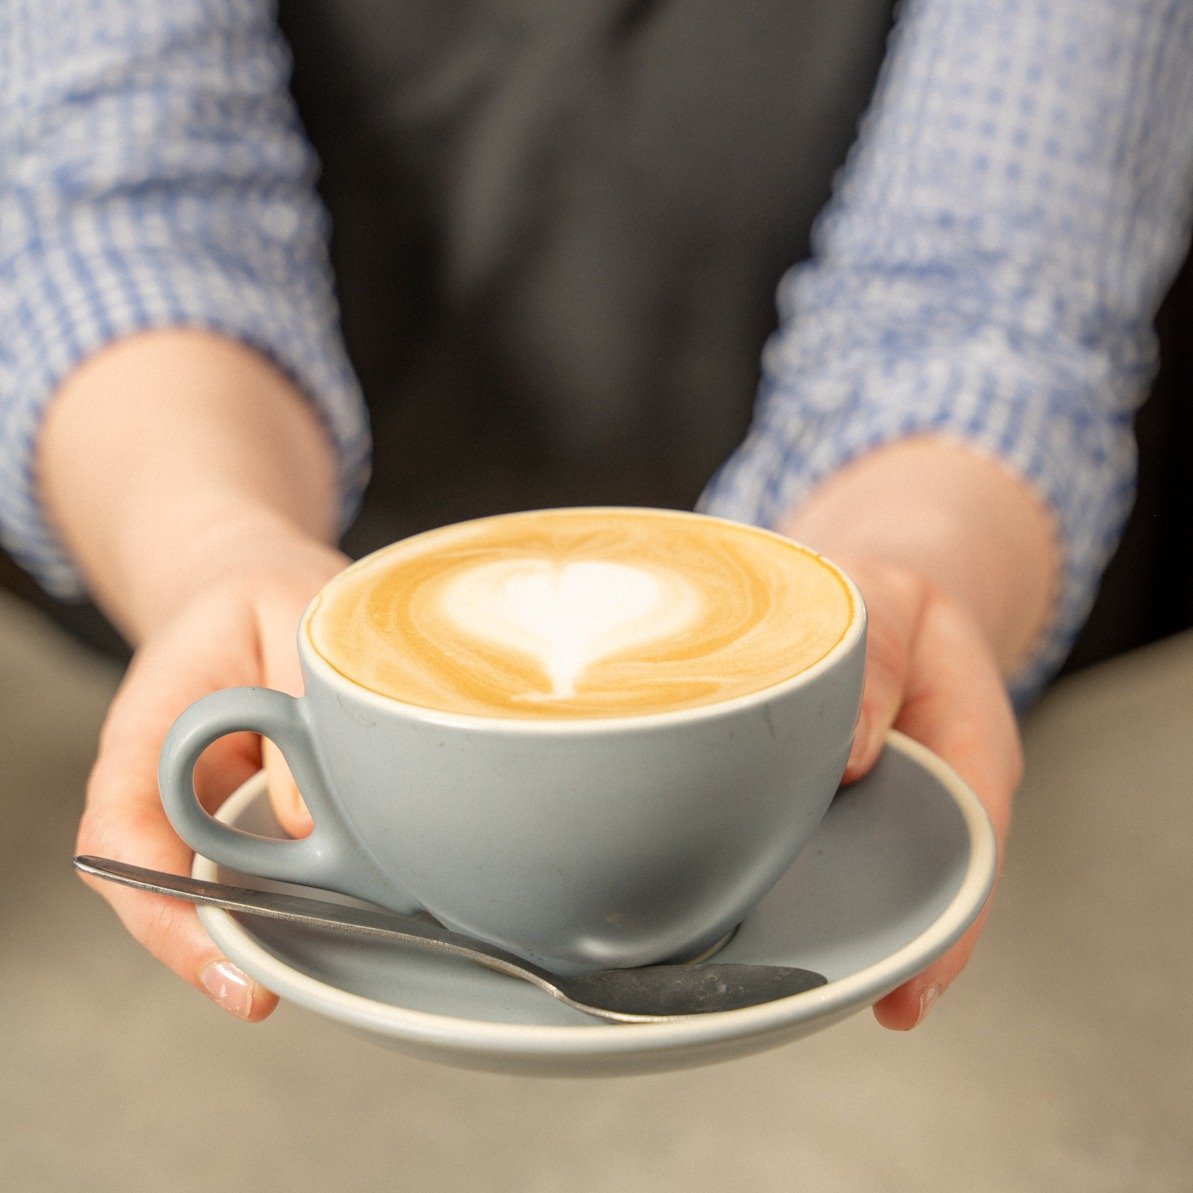 Morning coffee is a must! Come in early as we got a hot seat at Cronulla RSL! Are you ready to enjoy a nice cup of coffee and maybe a cheeky slice of cake too at the Bites by the Bay? 😉

#cronullarsl #bitesbythebay #morningcoffee #littlebites